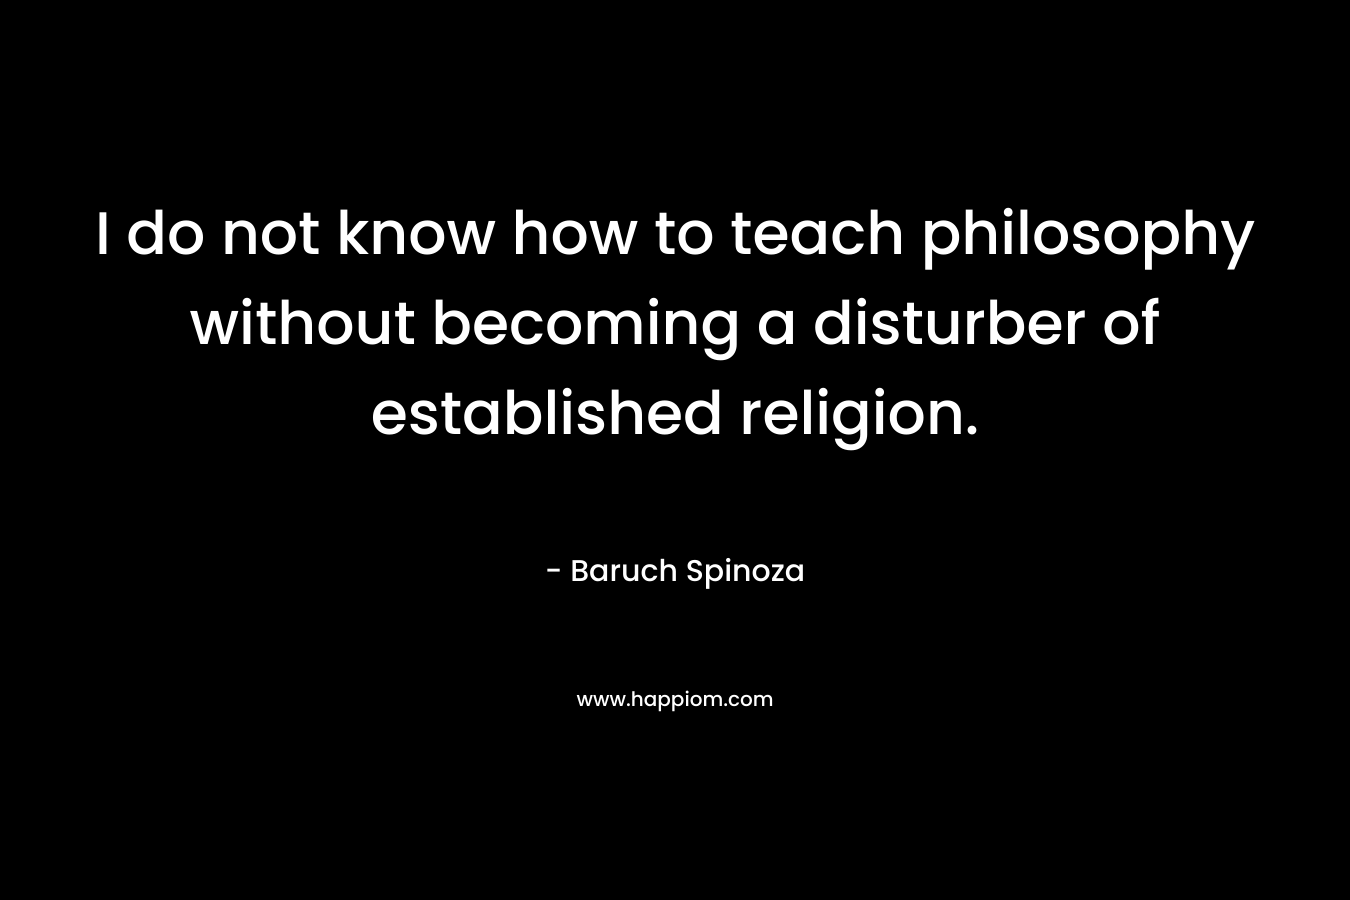 I do not know how to teach philosophy without becoming a disturber of established religion. – Baruch Spinoza